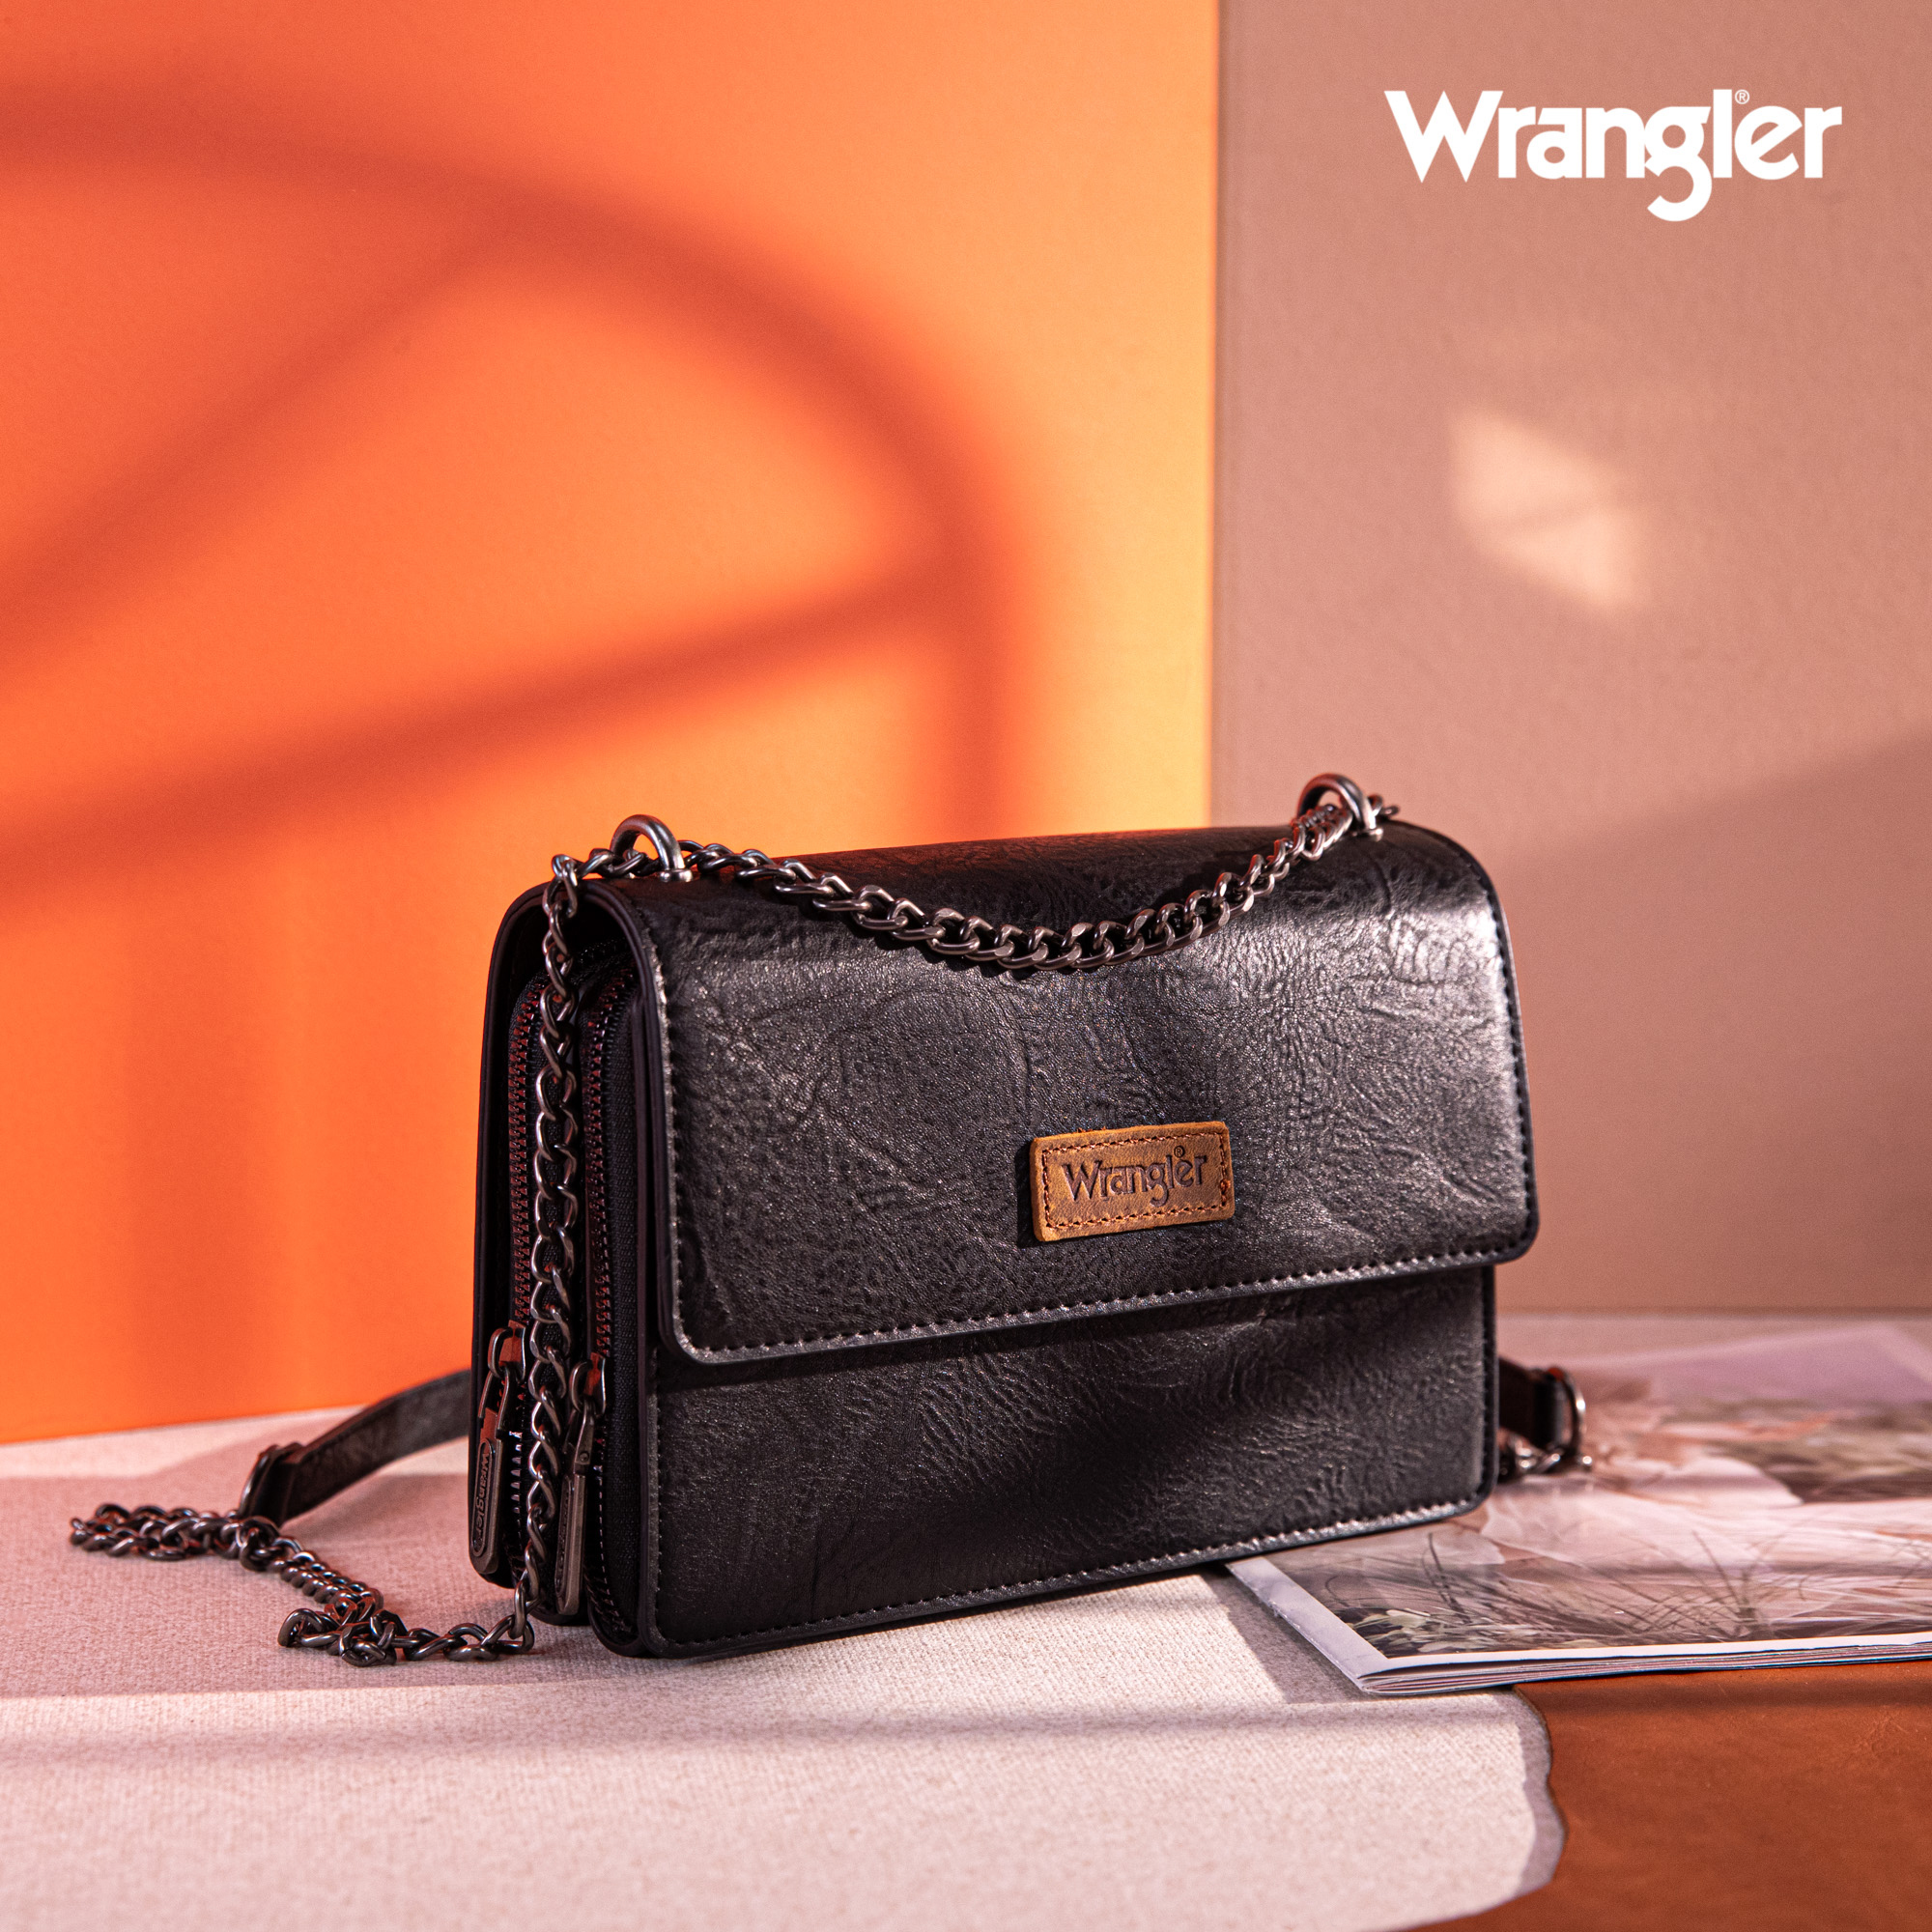 Wrangler Flap CrossBody Purse for Women Small Shoulder Bag with Chain  Strap, Black